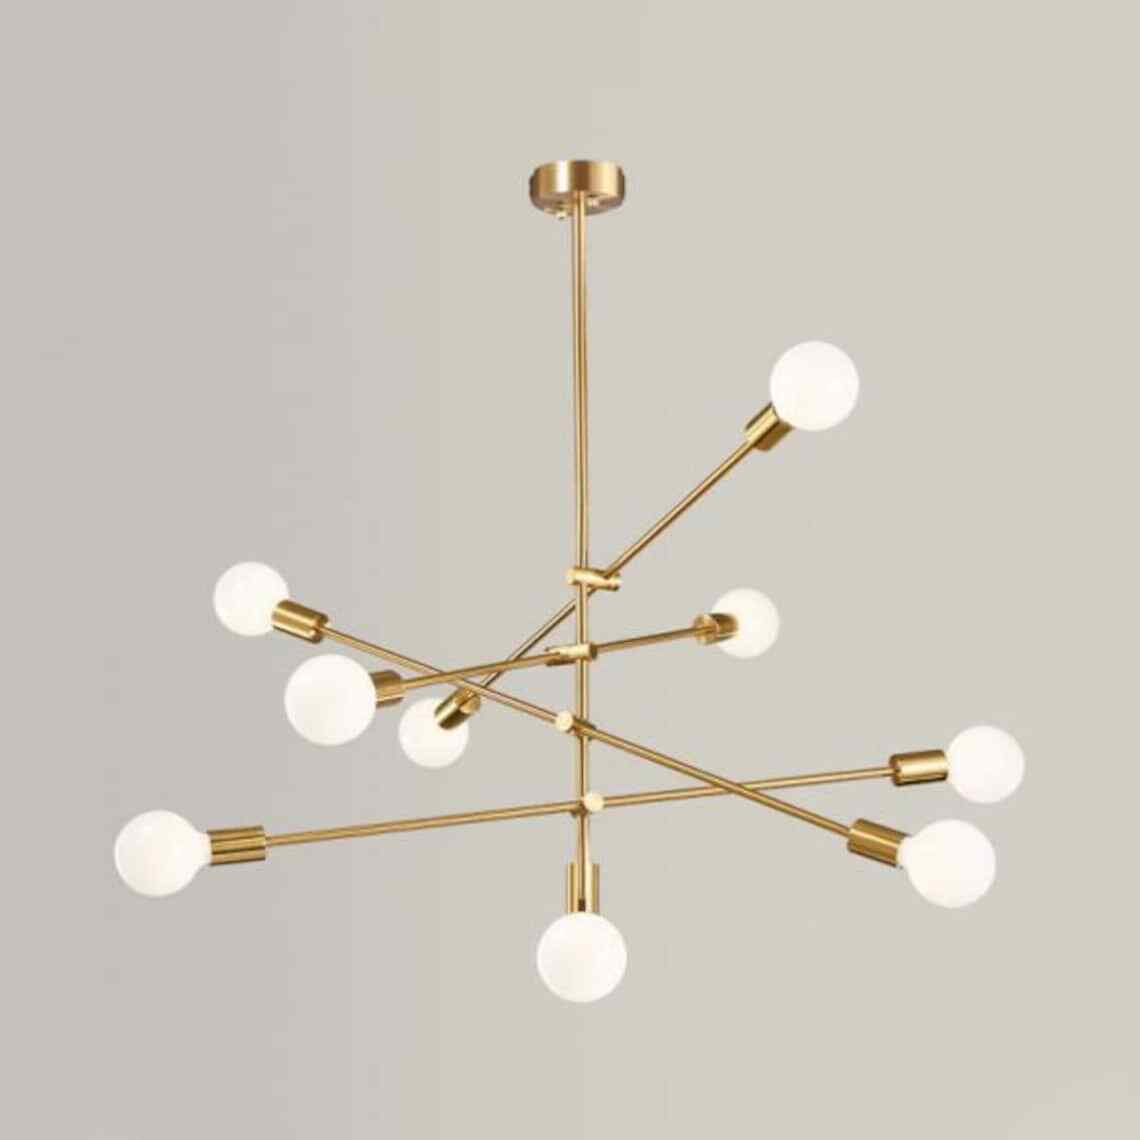 Mid Century Chandelier 8+1 Lights Ceiling Lamp in Polished Brass Modern Fixture